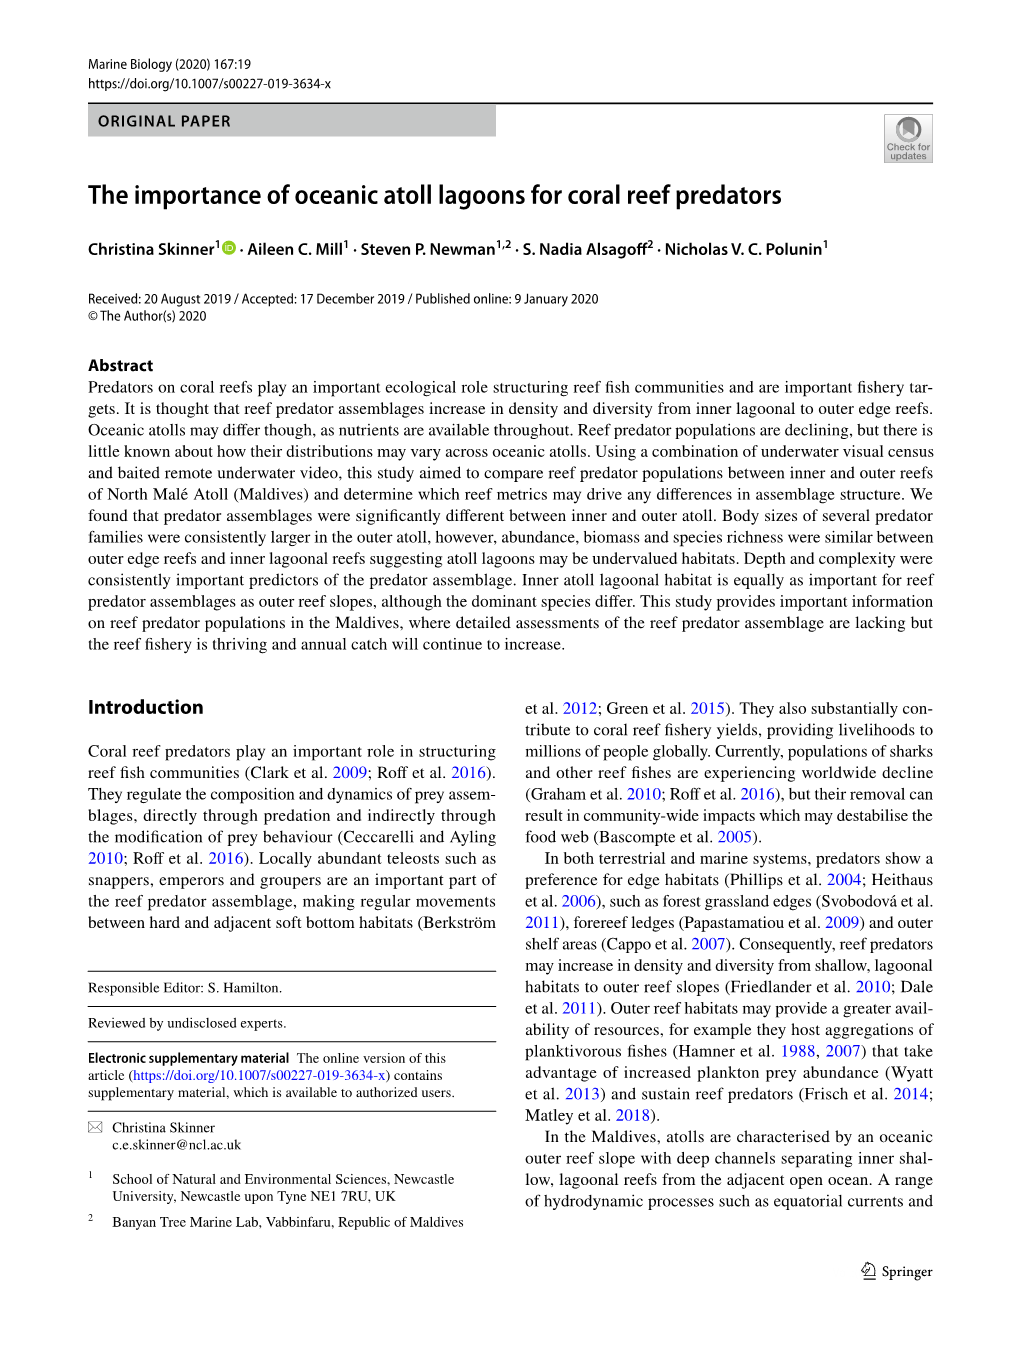 The Importance of Oceanic Atoll Lagoons for Coral Reef Predators